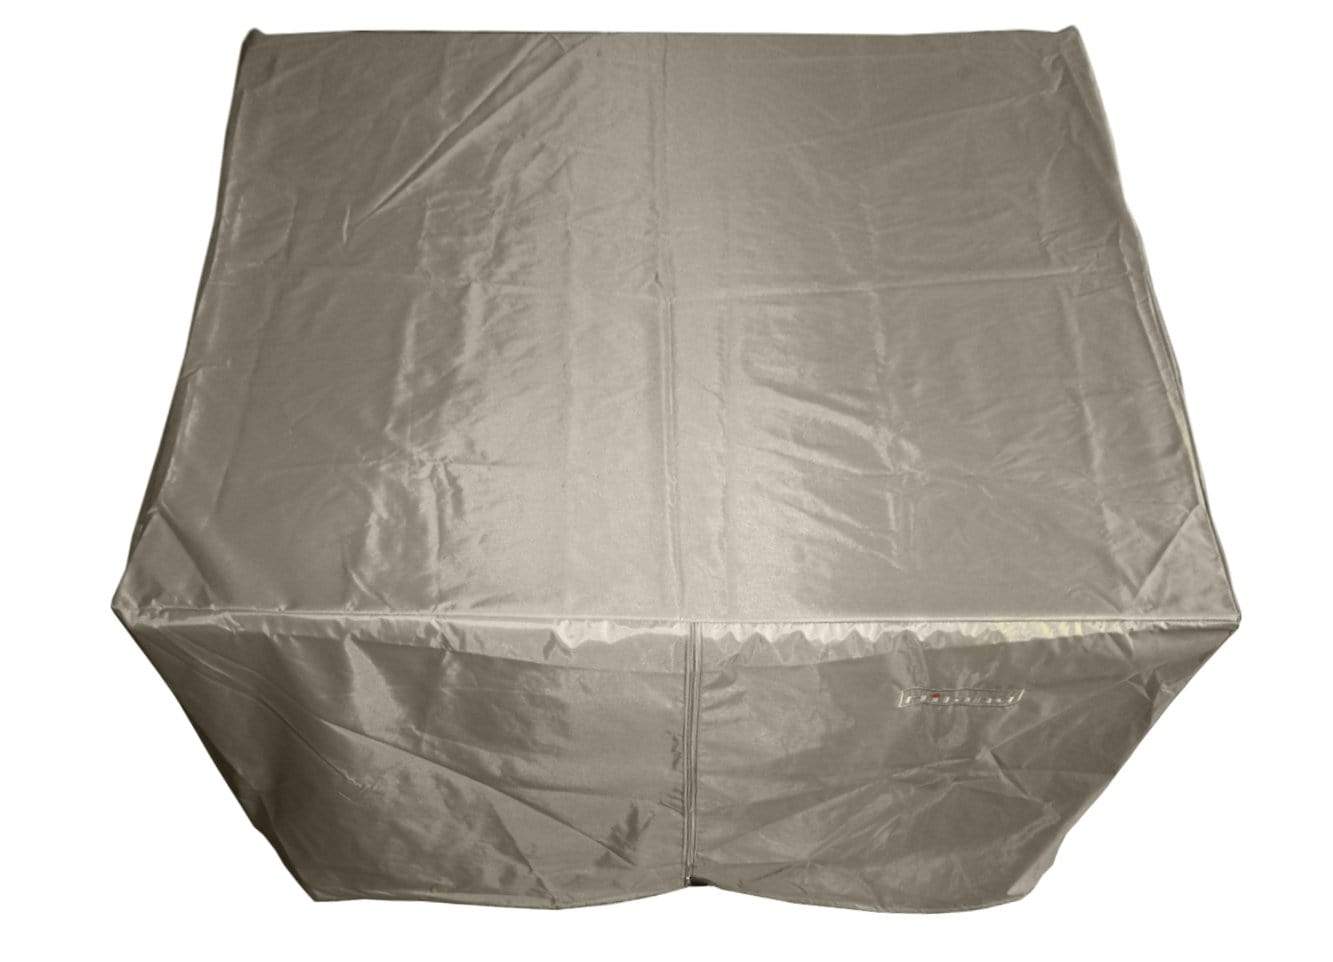 Hiland Heater Covers Hiland Patio Heaters Square Fire Pit Cover